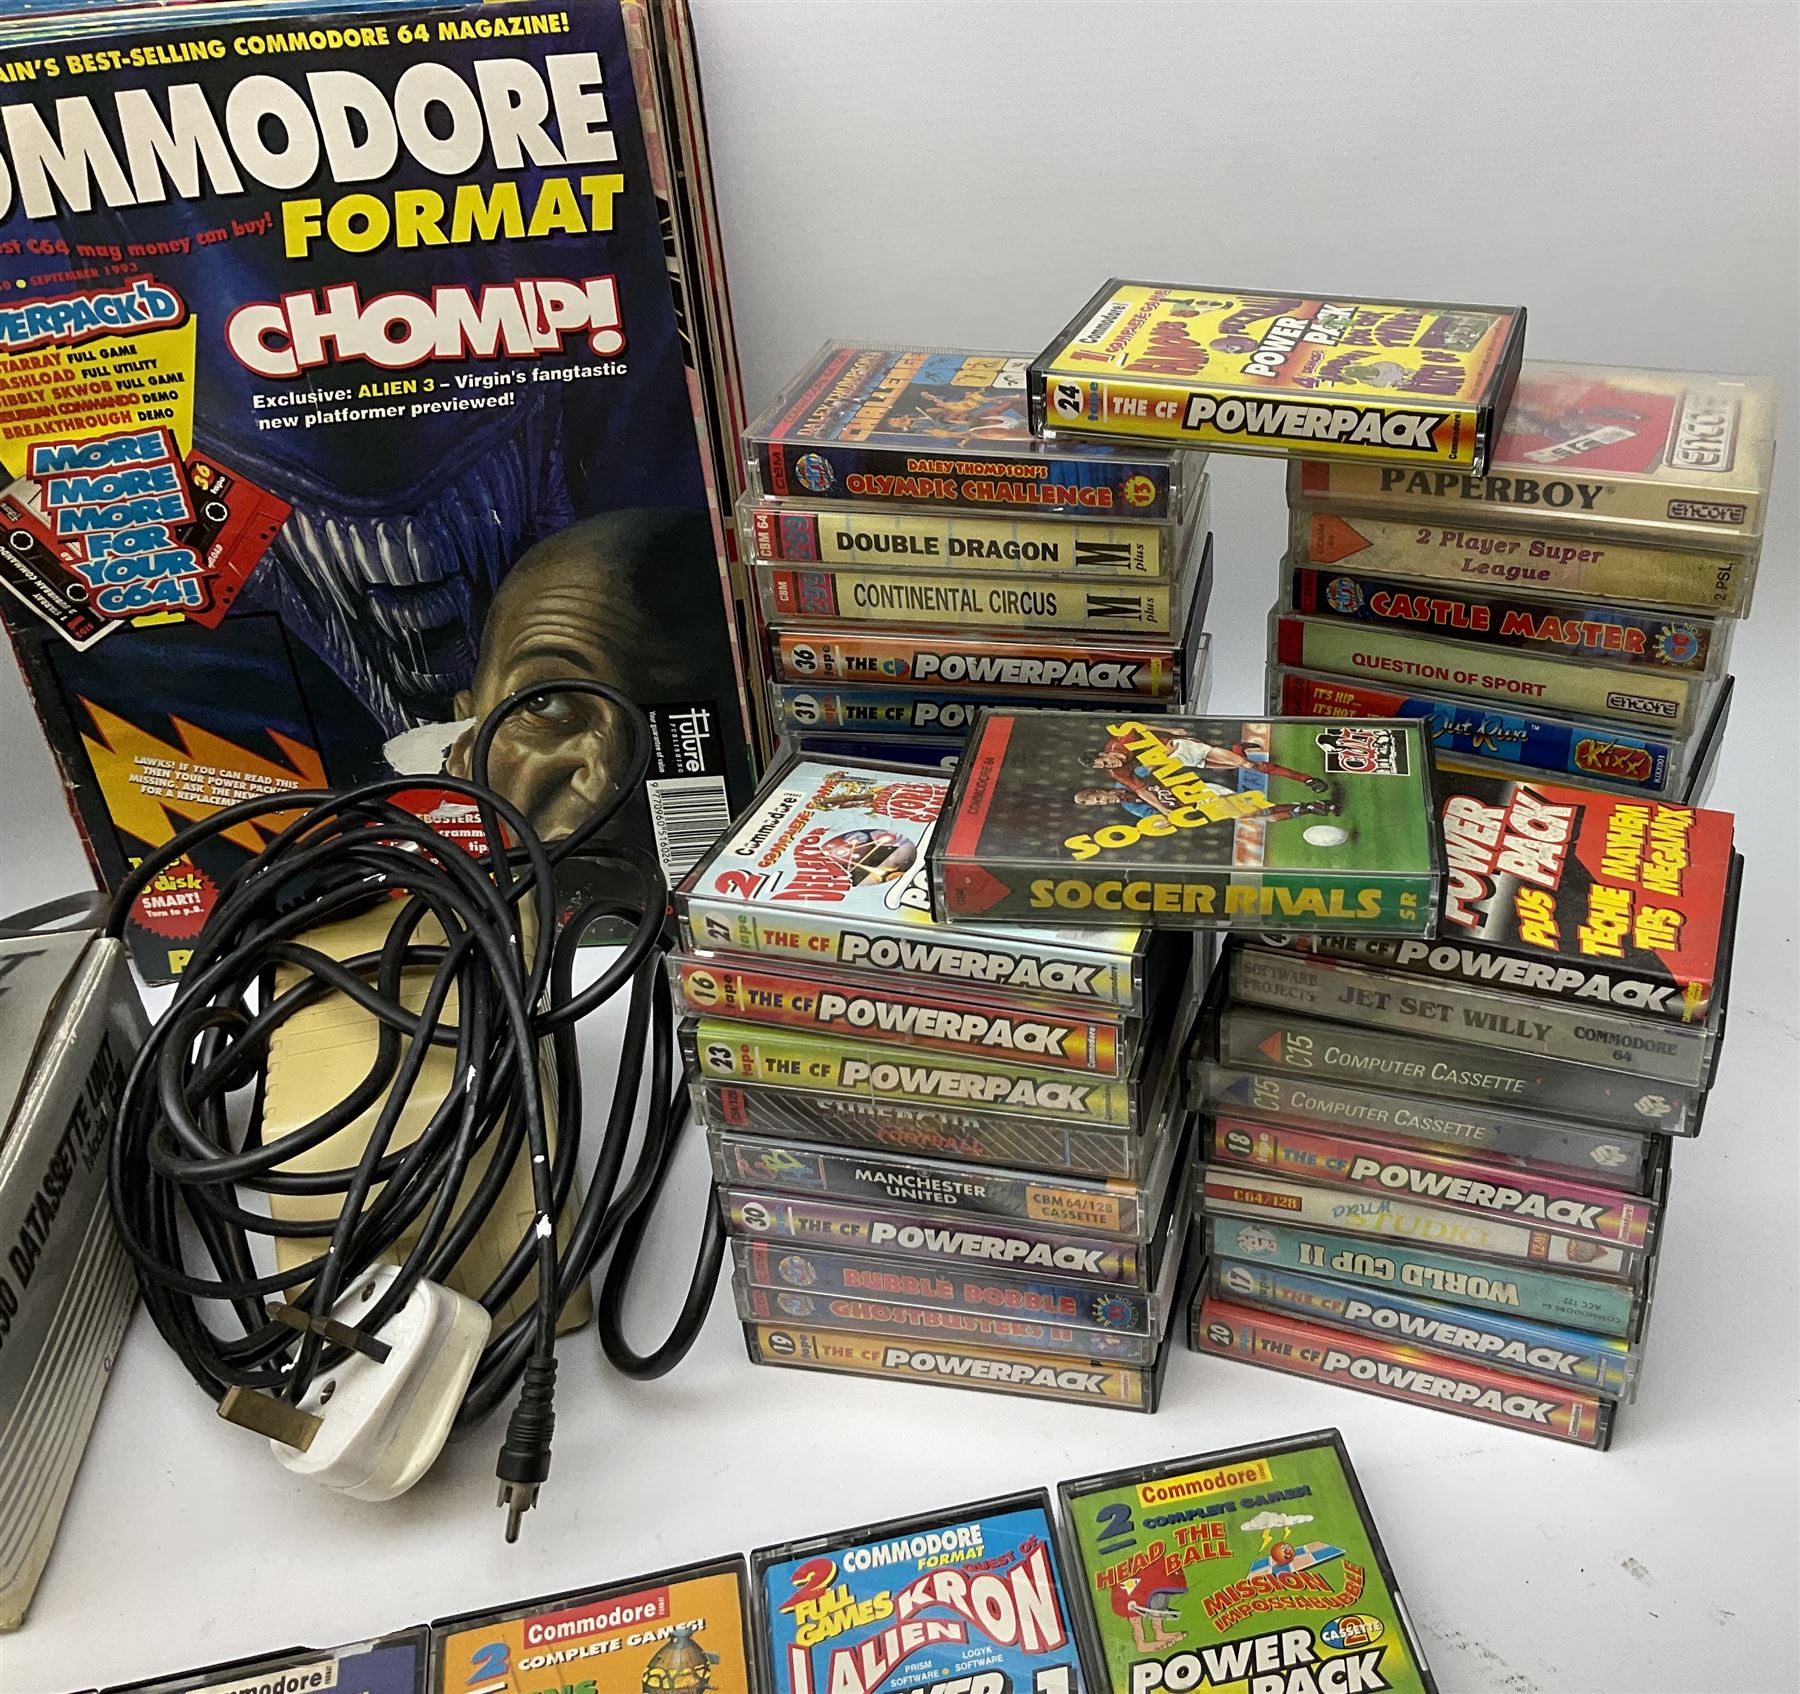 Commodore 64 games computer with boxed 1530 Datassette Unit Model C2N - Image 4 of 8